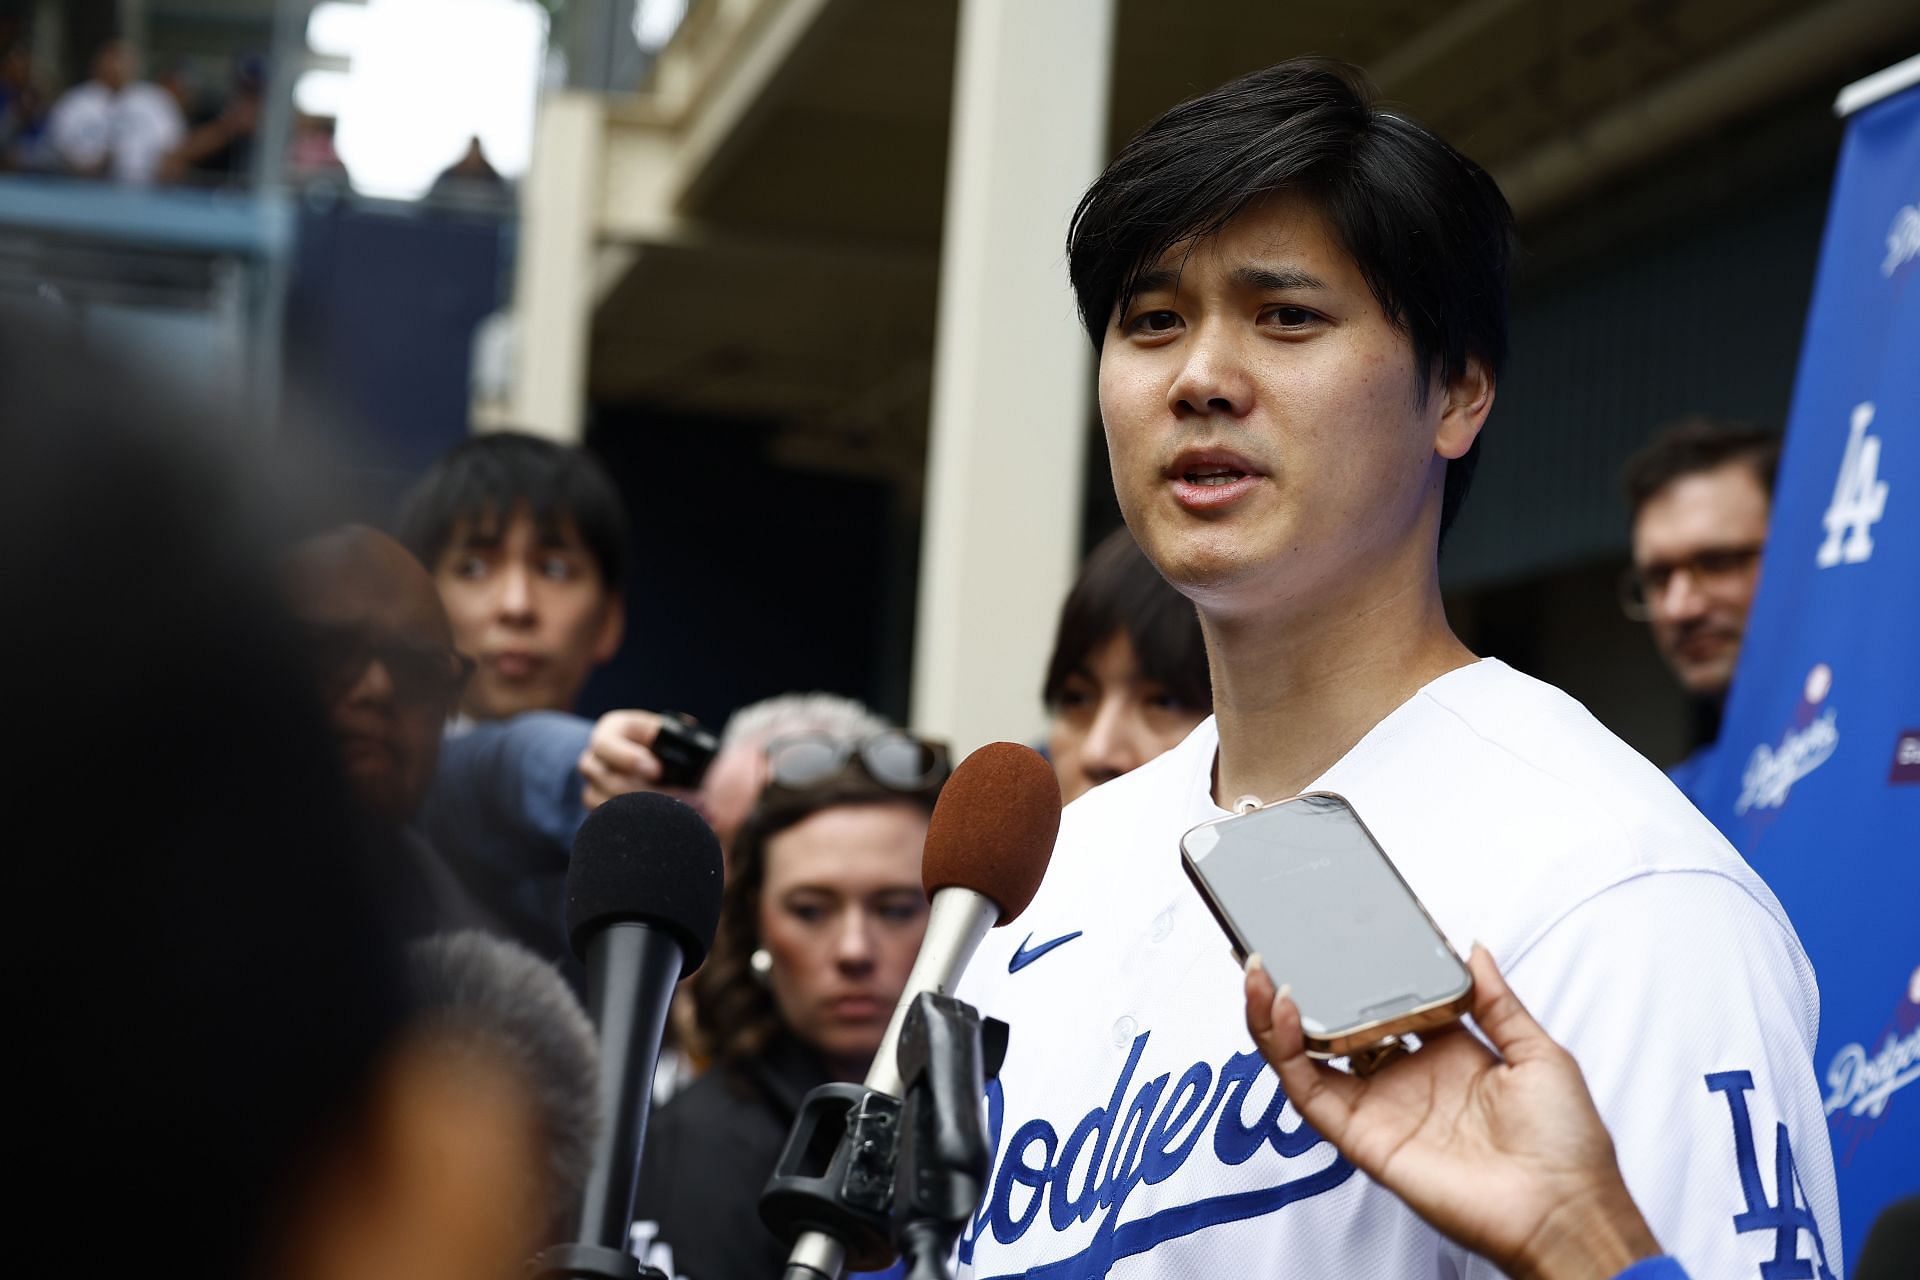 DodgerFest has seen a surge in Japanese media interested in gathering information on Shohei Ohtani